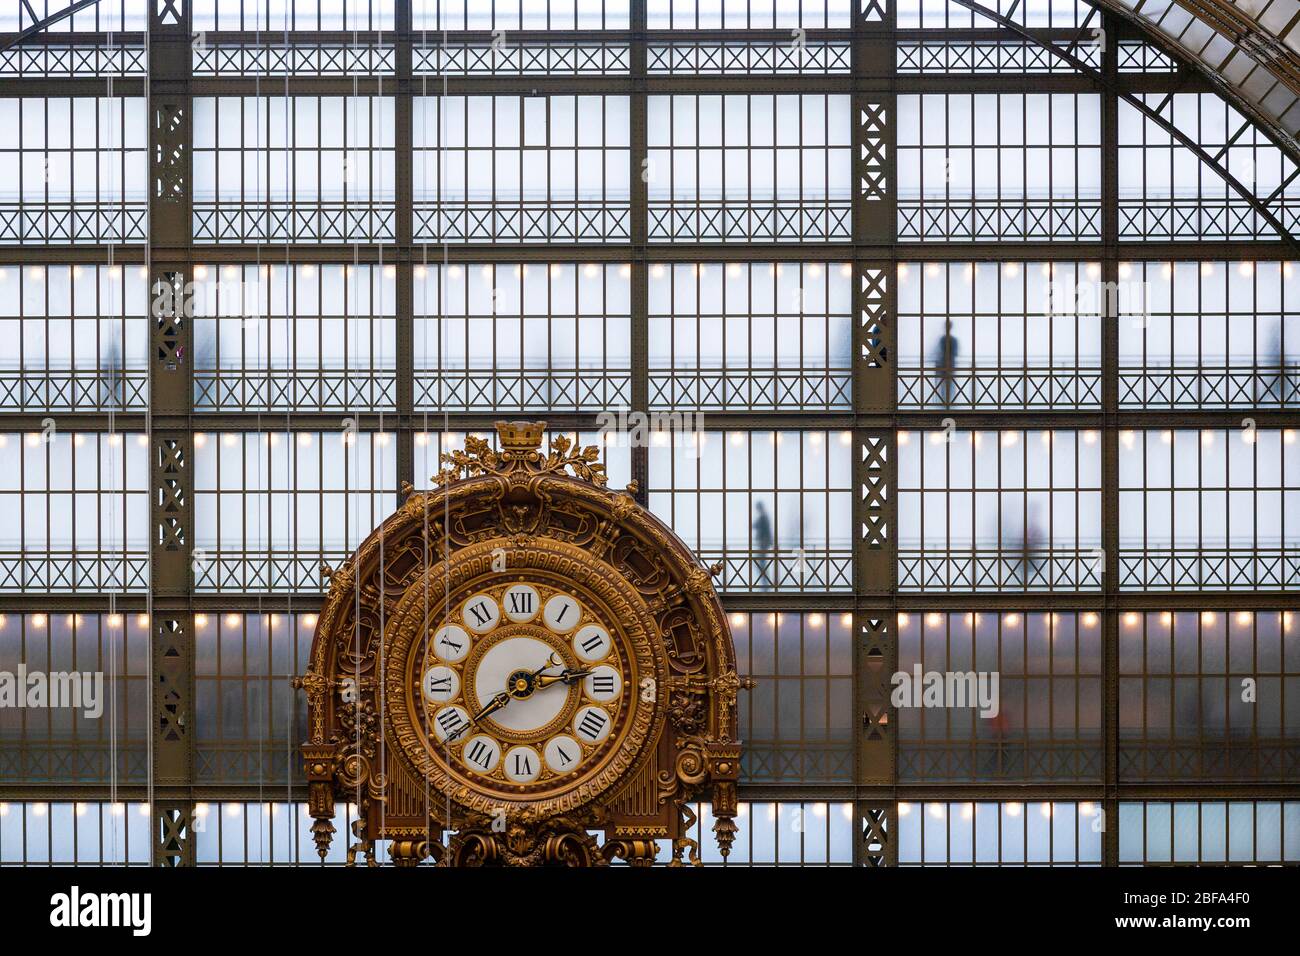 Musee d'Orsay Interior, Elevated View, Paris, France Stock Photo